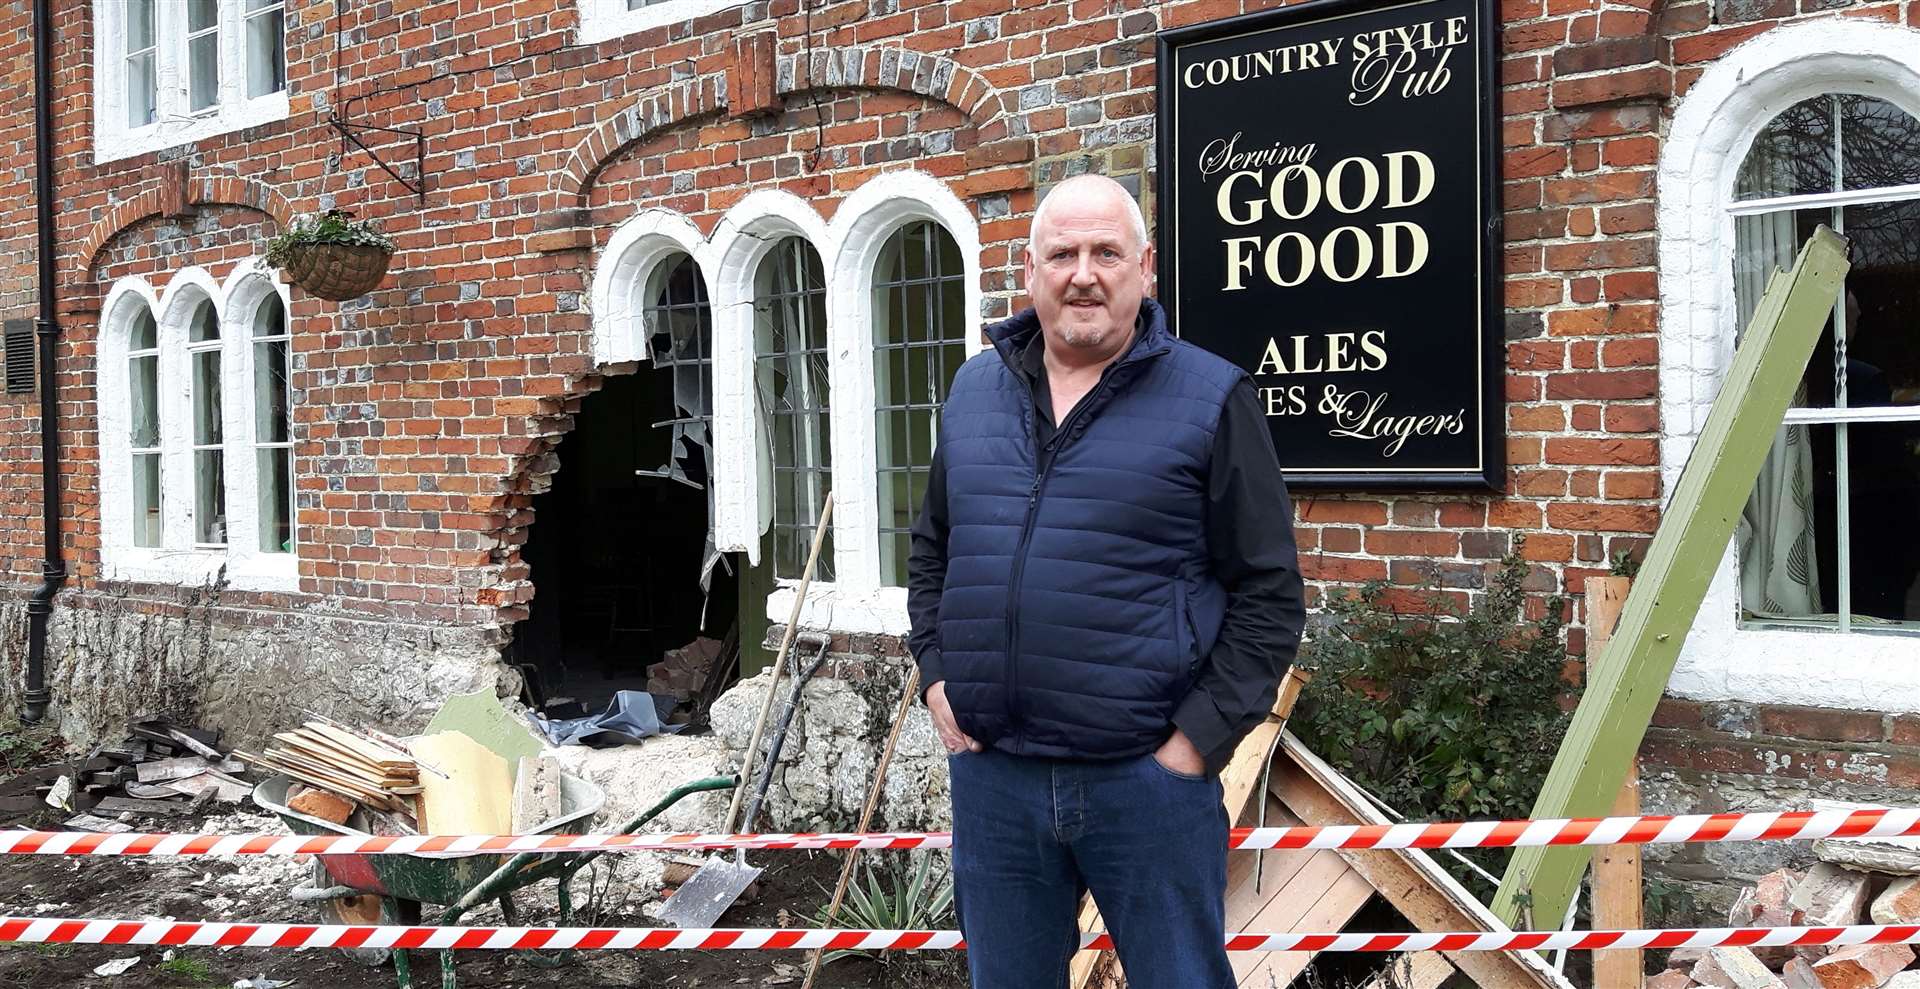 In February 2017 a similar crash happened. Then landlord, Brian Davies, inspects the damage